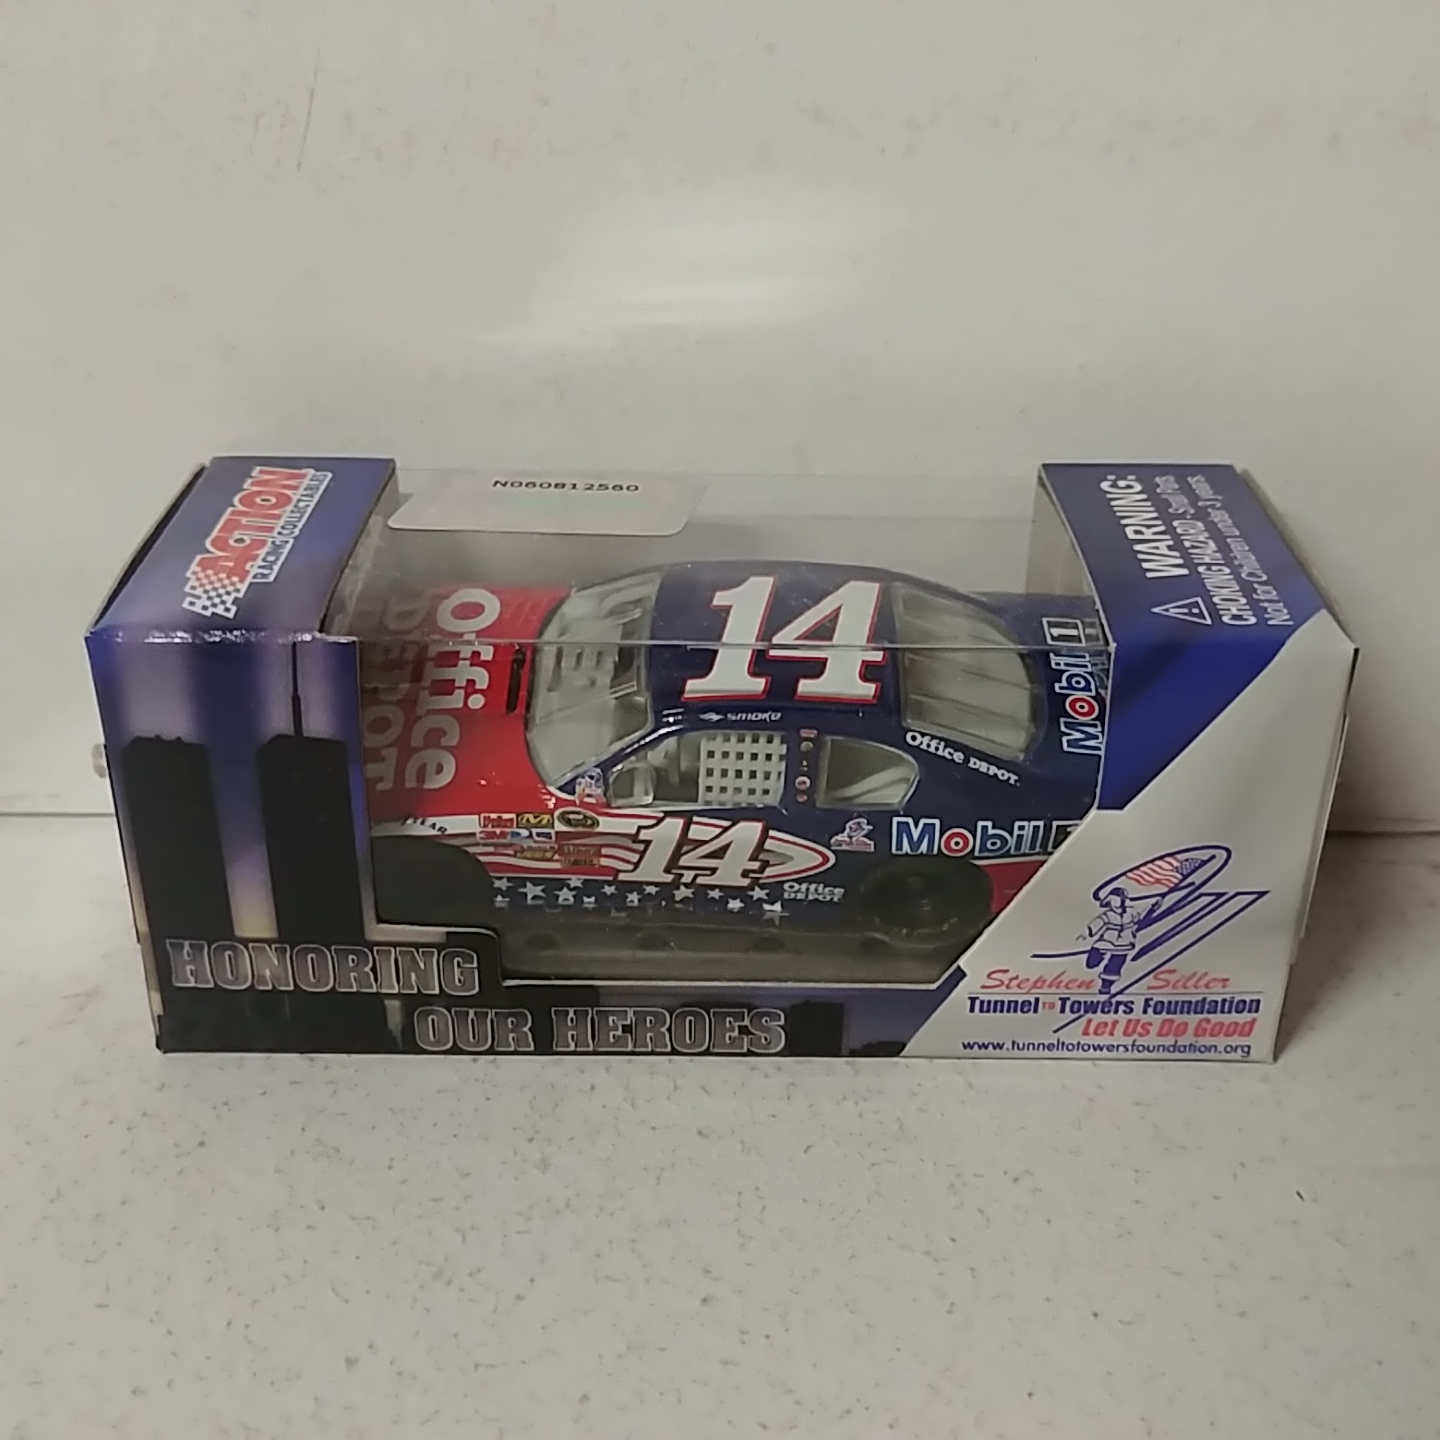 2011 Tony Stewart 1/64th Office Depot "Honor Our Heros" Pitstop Series Impala